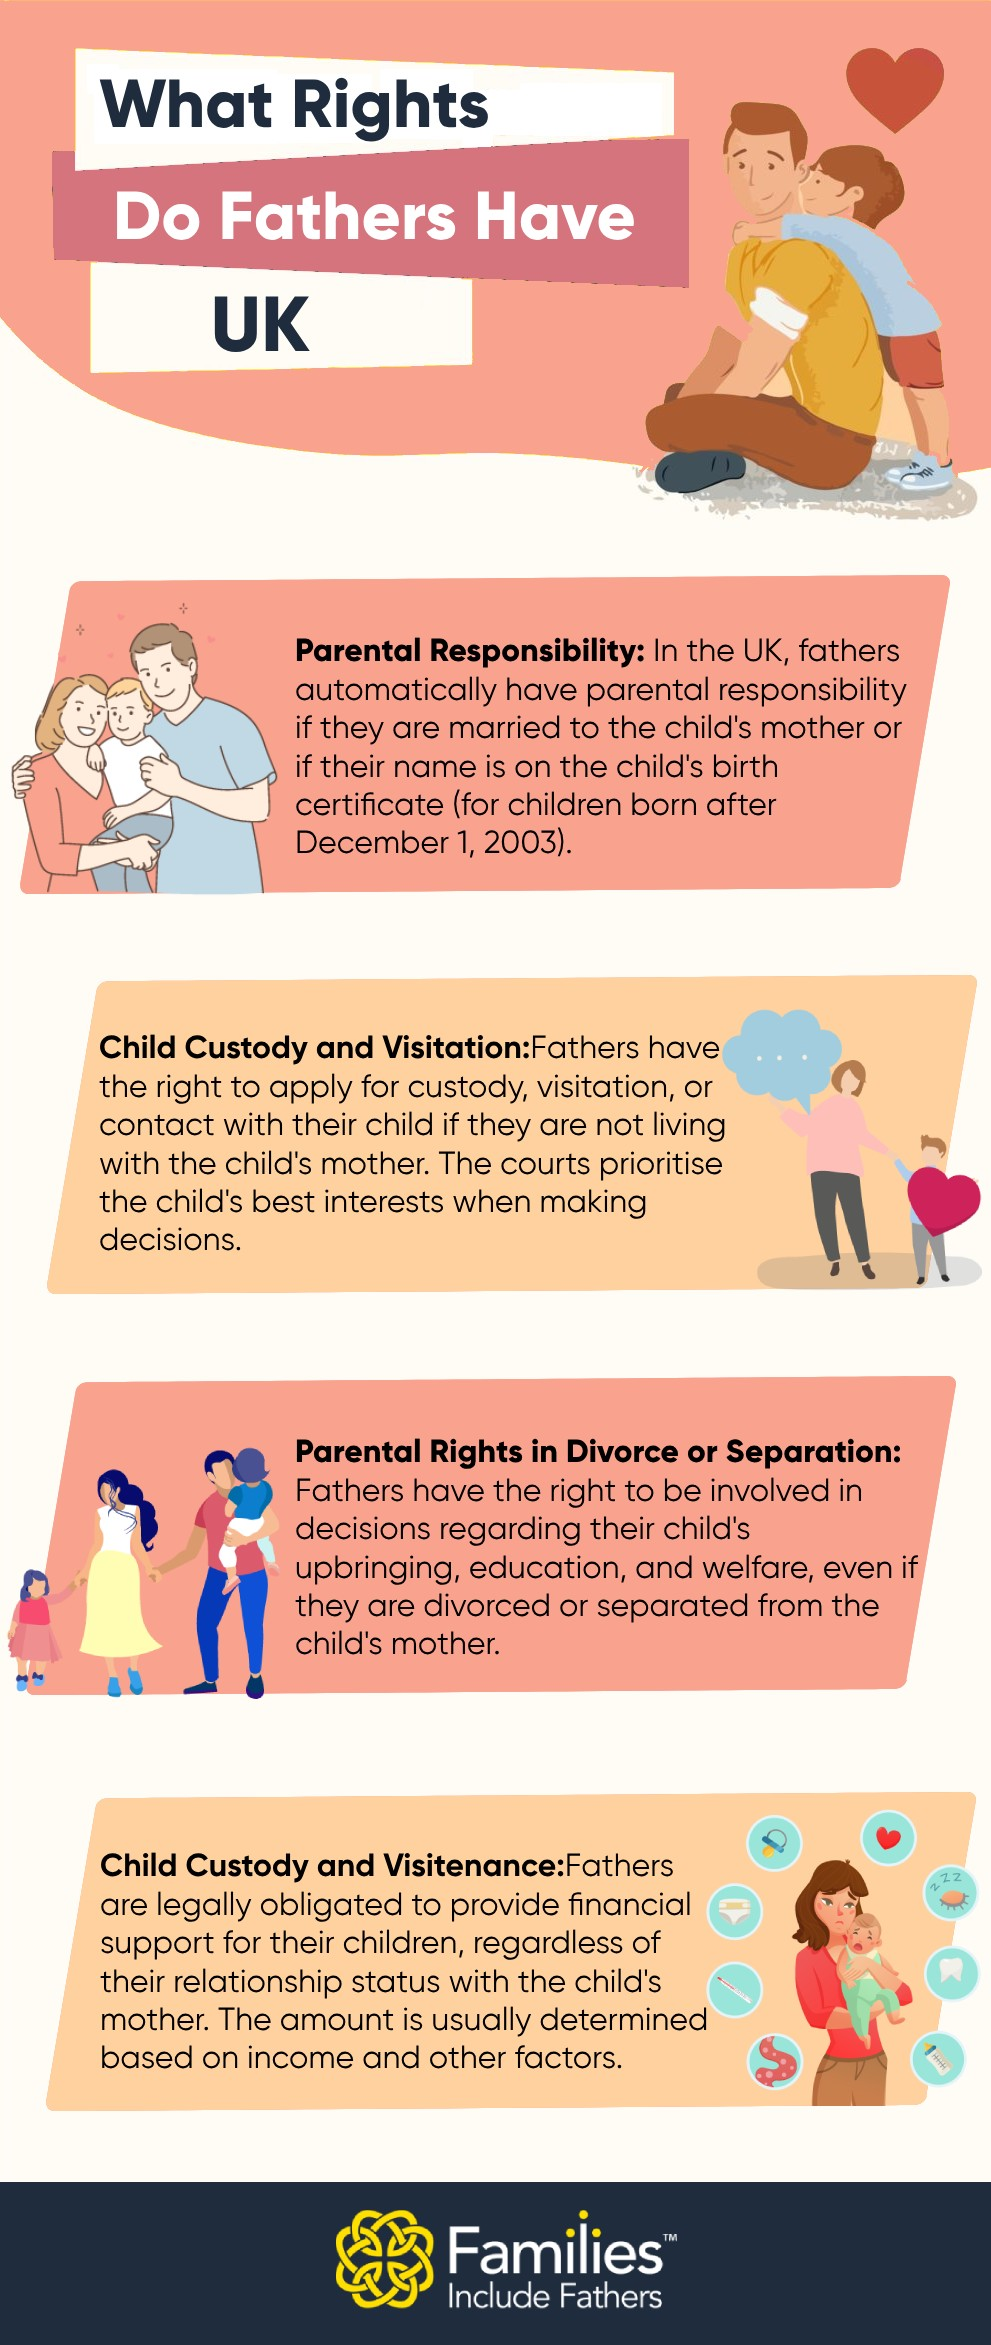 What Rights Do Fathers Have UK